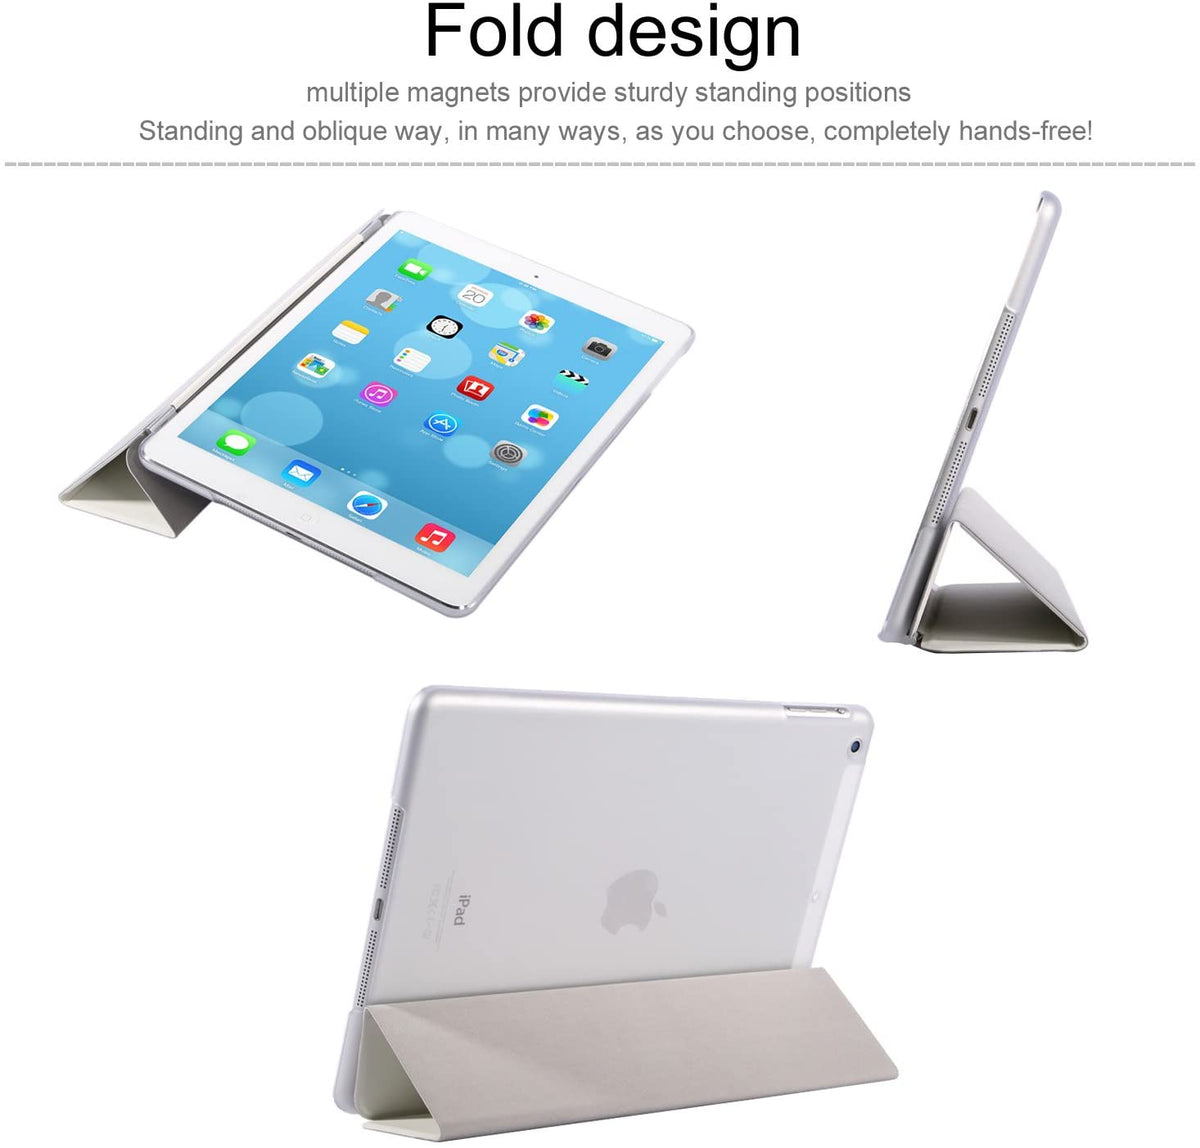 Magnetic Smart Cover Stand + Translucent Hard Back Case for iPad Air + Stylus Pen + Screen Protector Film (White - PT4101)